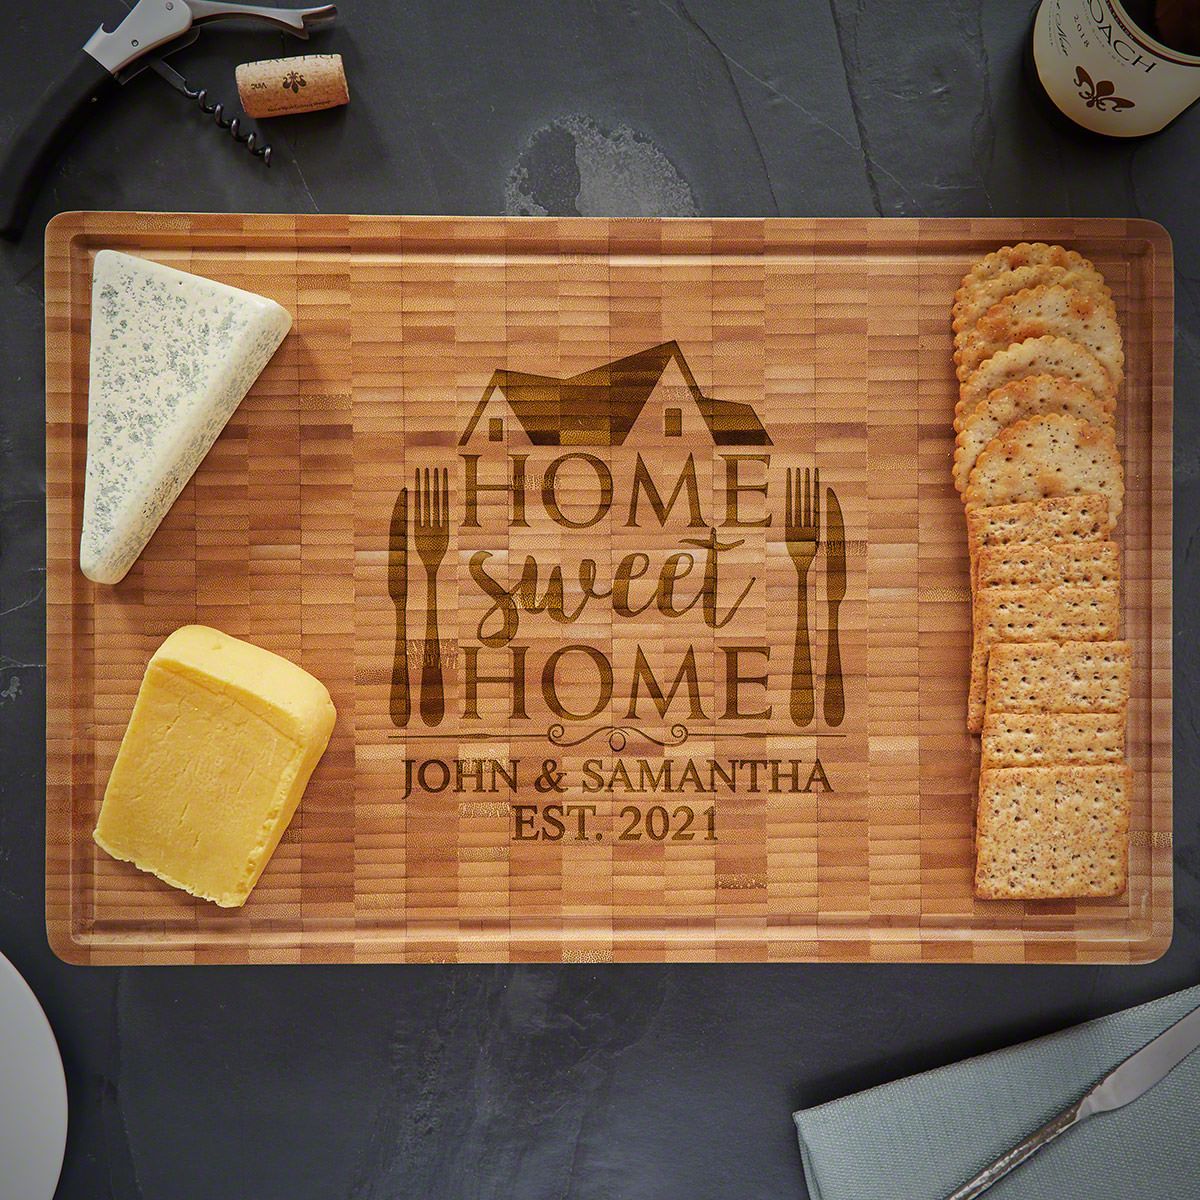 https://images.homewetbar.com/media/catalog/product/h/o/home-sweet-home-engraved-bamboo-cutting-board_p_9318.jpg?store=default&image-type=image